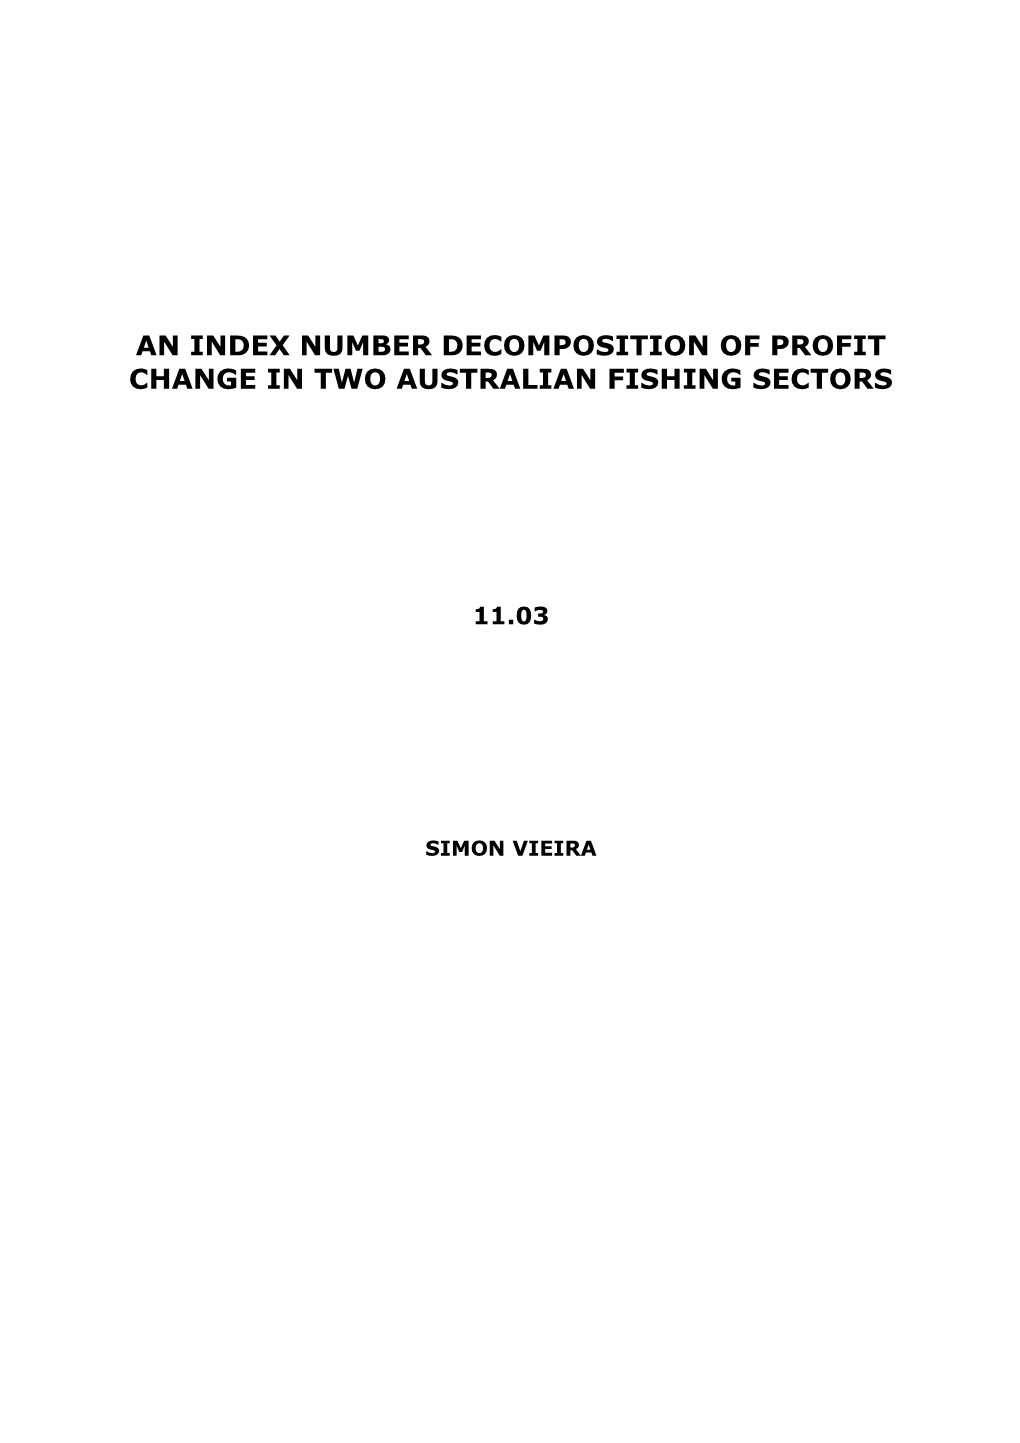 An Index Number Decomposition of Profit Change in Two Australian Fishing Sectors 11.03